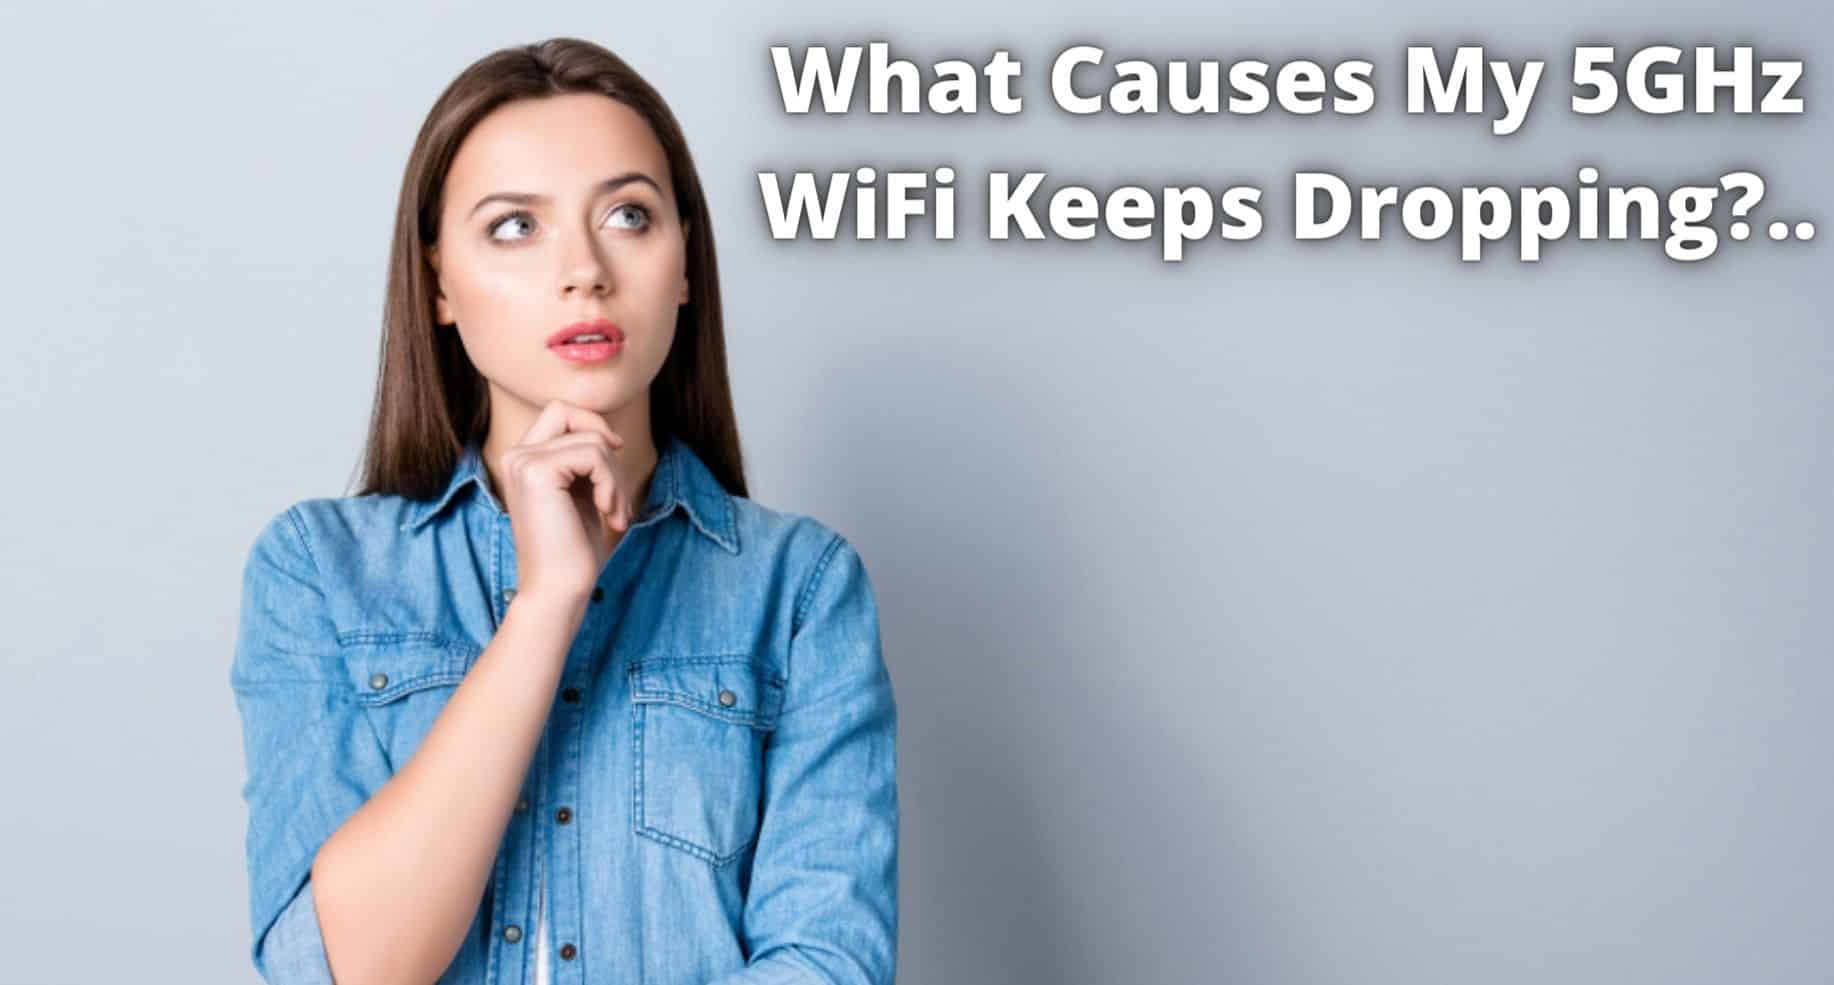 What Causes My 5GHz WiFi Keeps Dropping